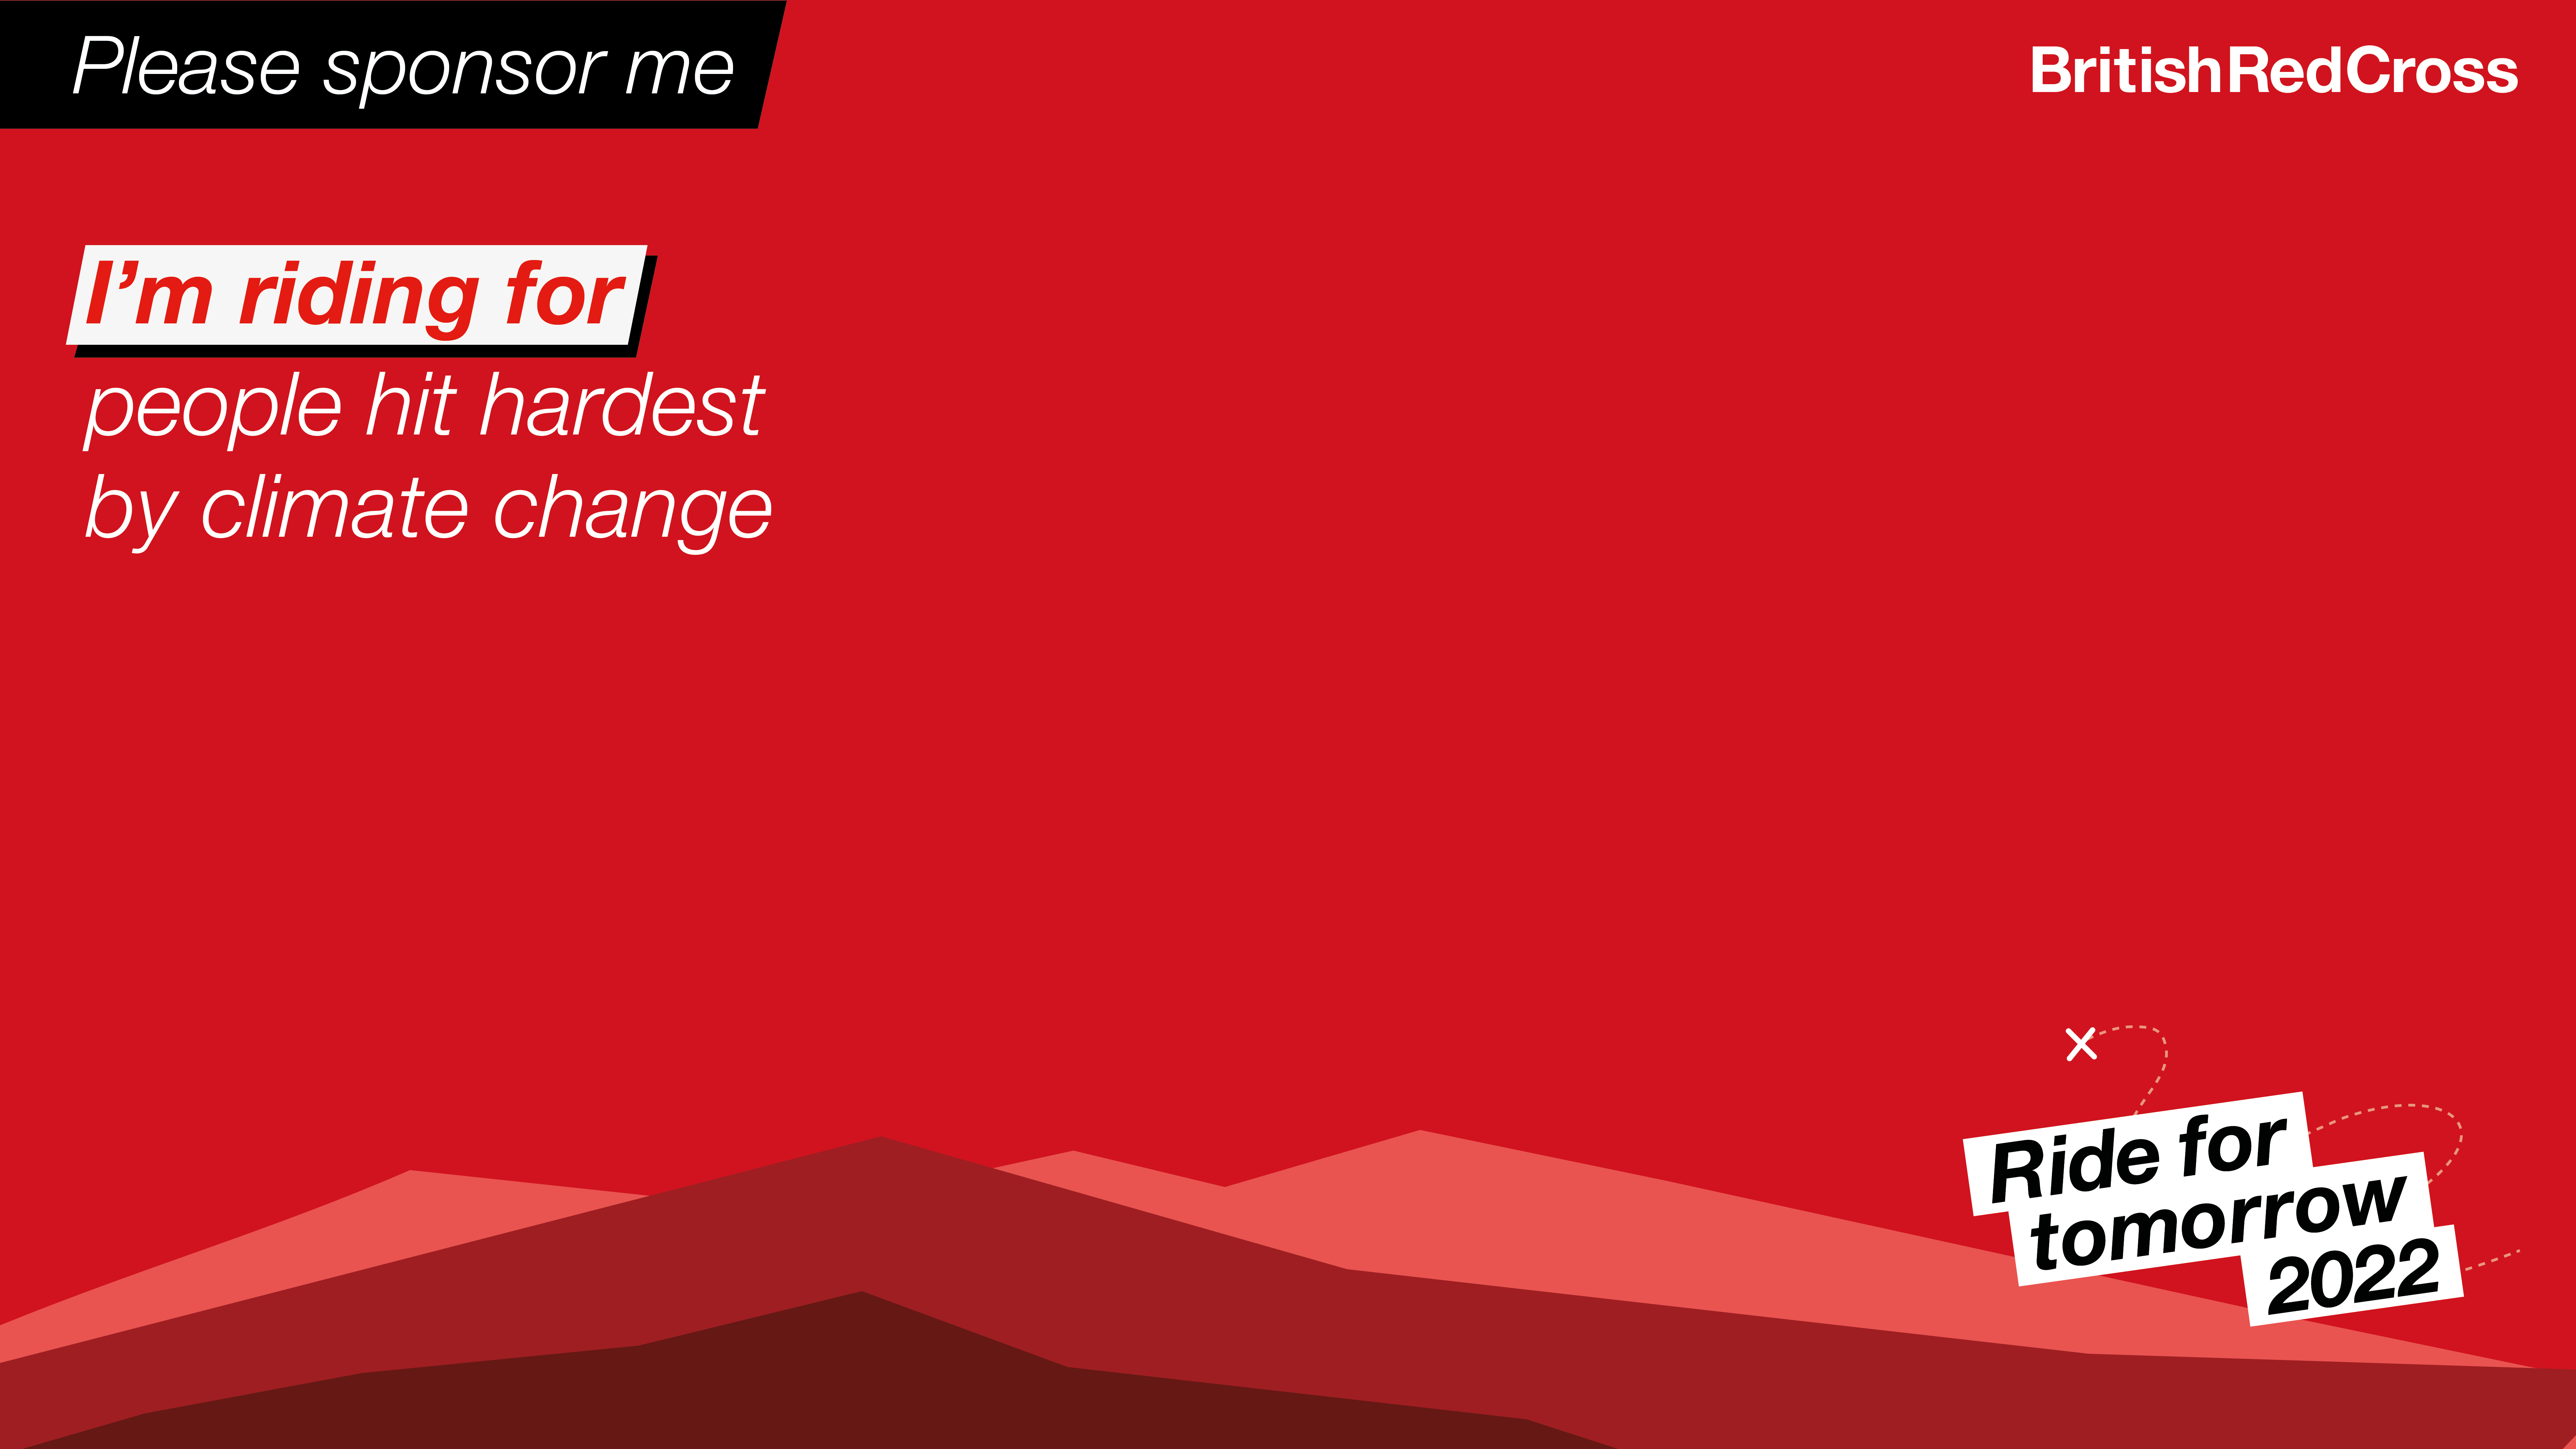 Please sponsor me. I'm riding for people hit hardest by climate change on a red background with 3 mountain outlines.